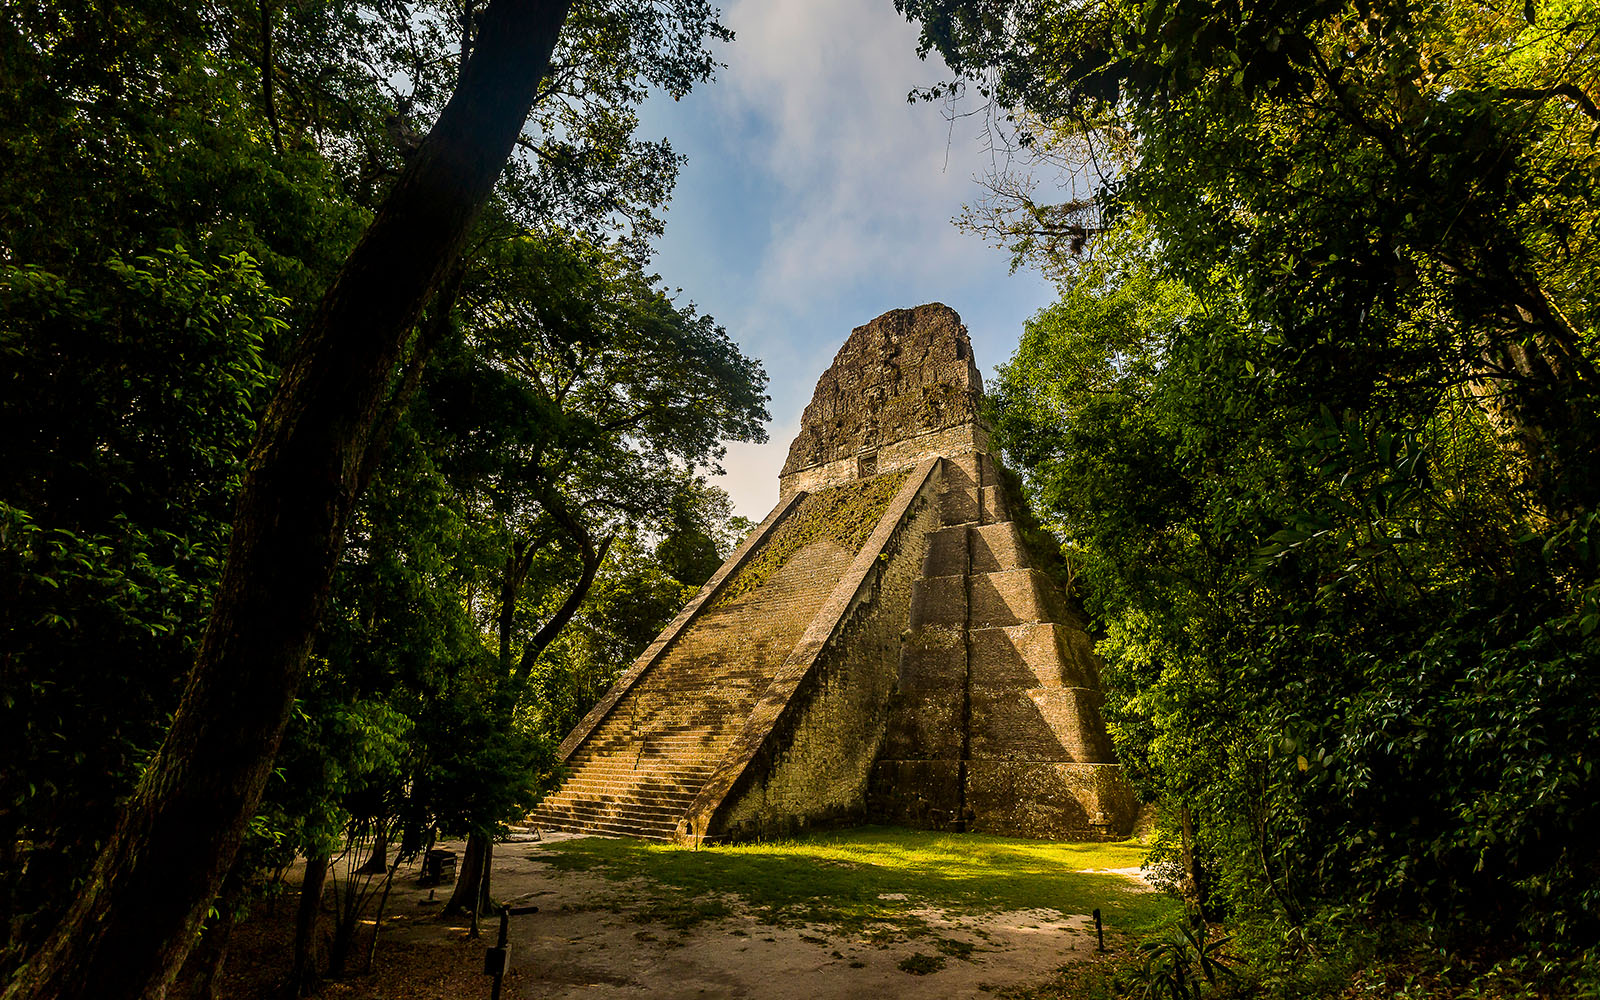 The heart of the Mayan World